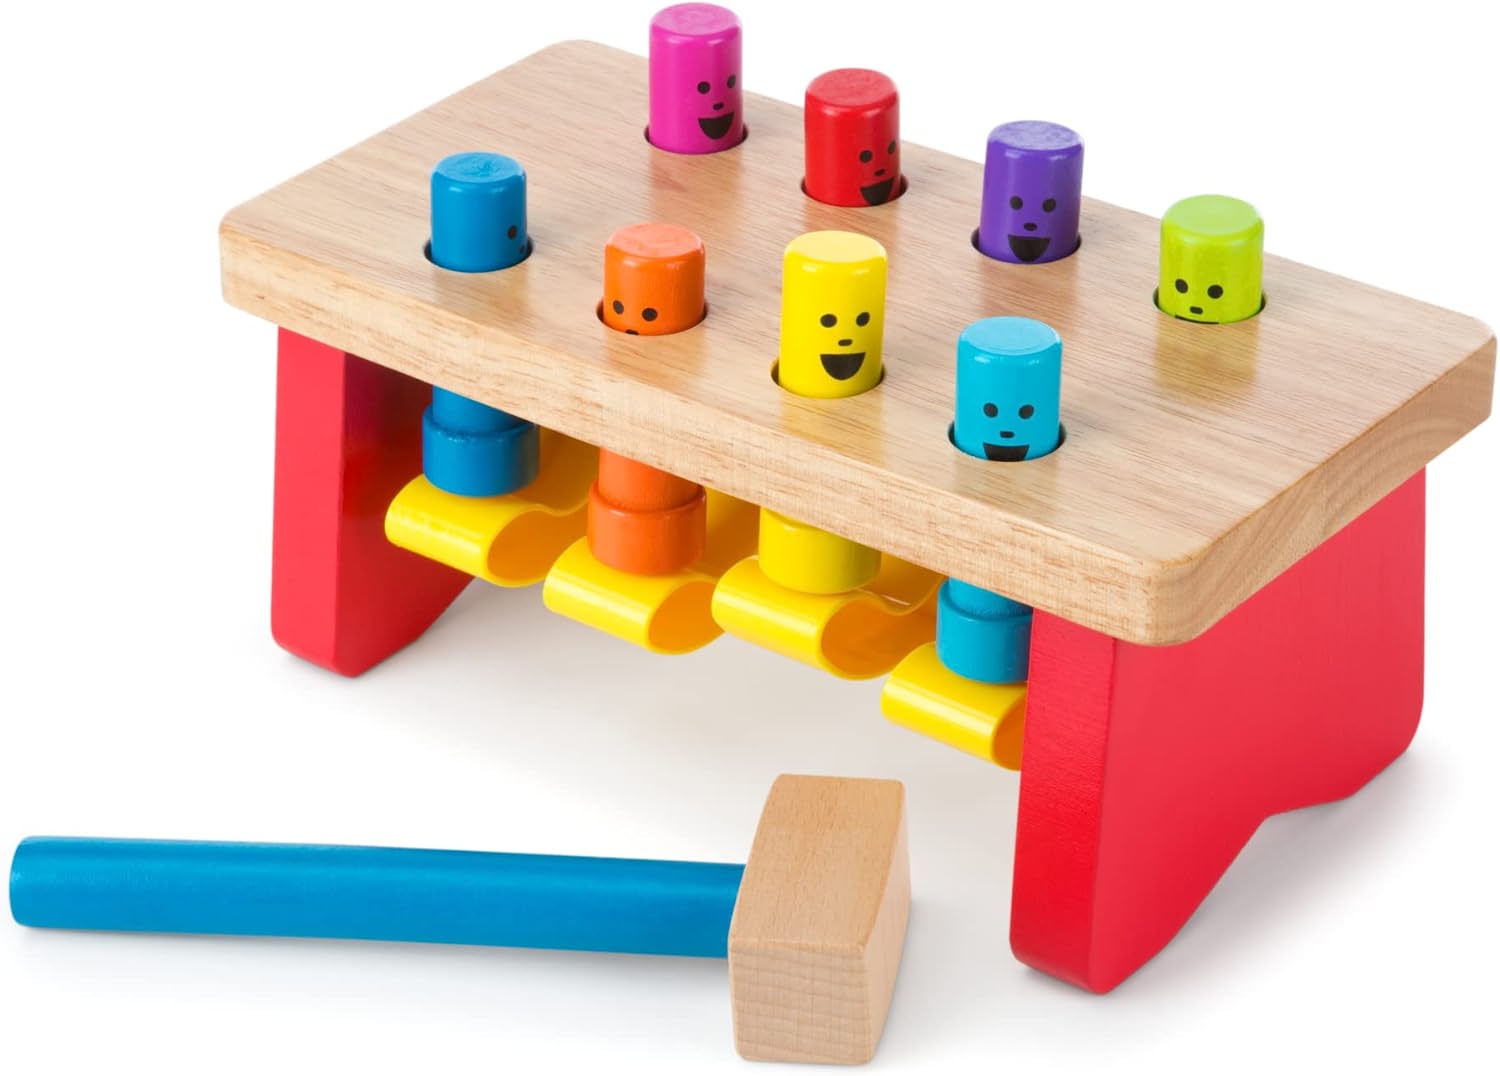 Melissa & Doug Deluxe Pounding Bench Wooden Toy With Mallet – Classic Wooden Toddler Toys For Ages 2+